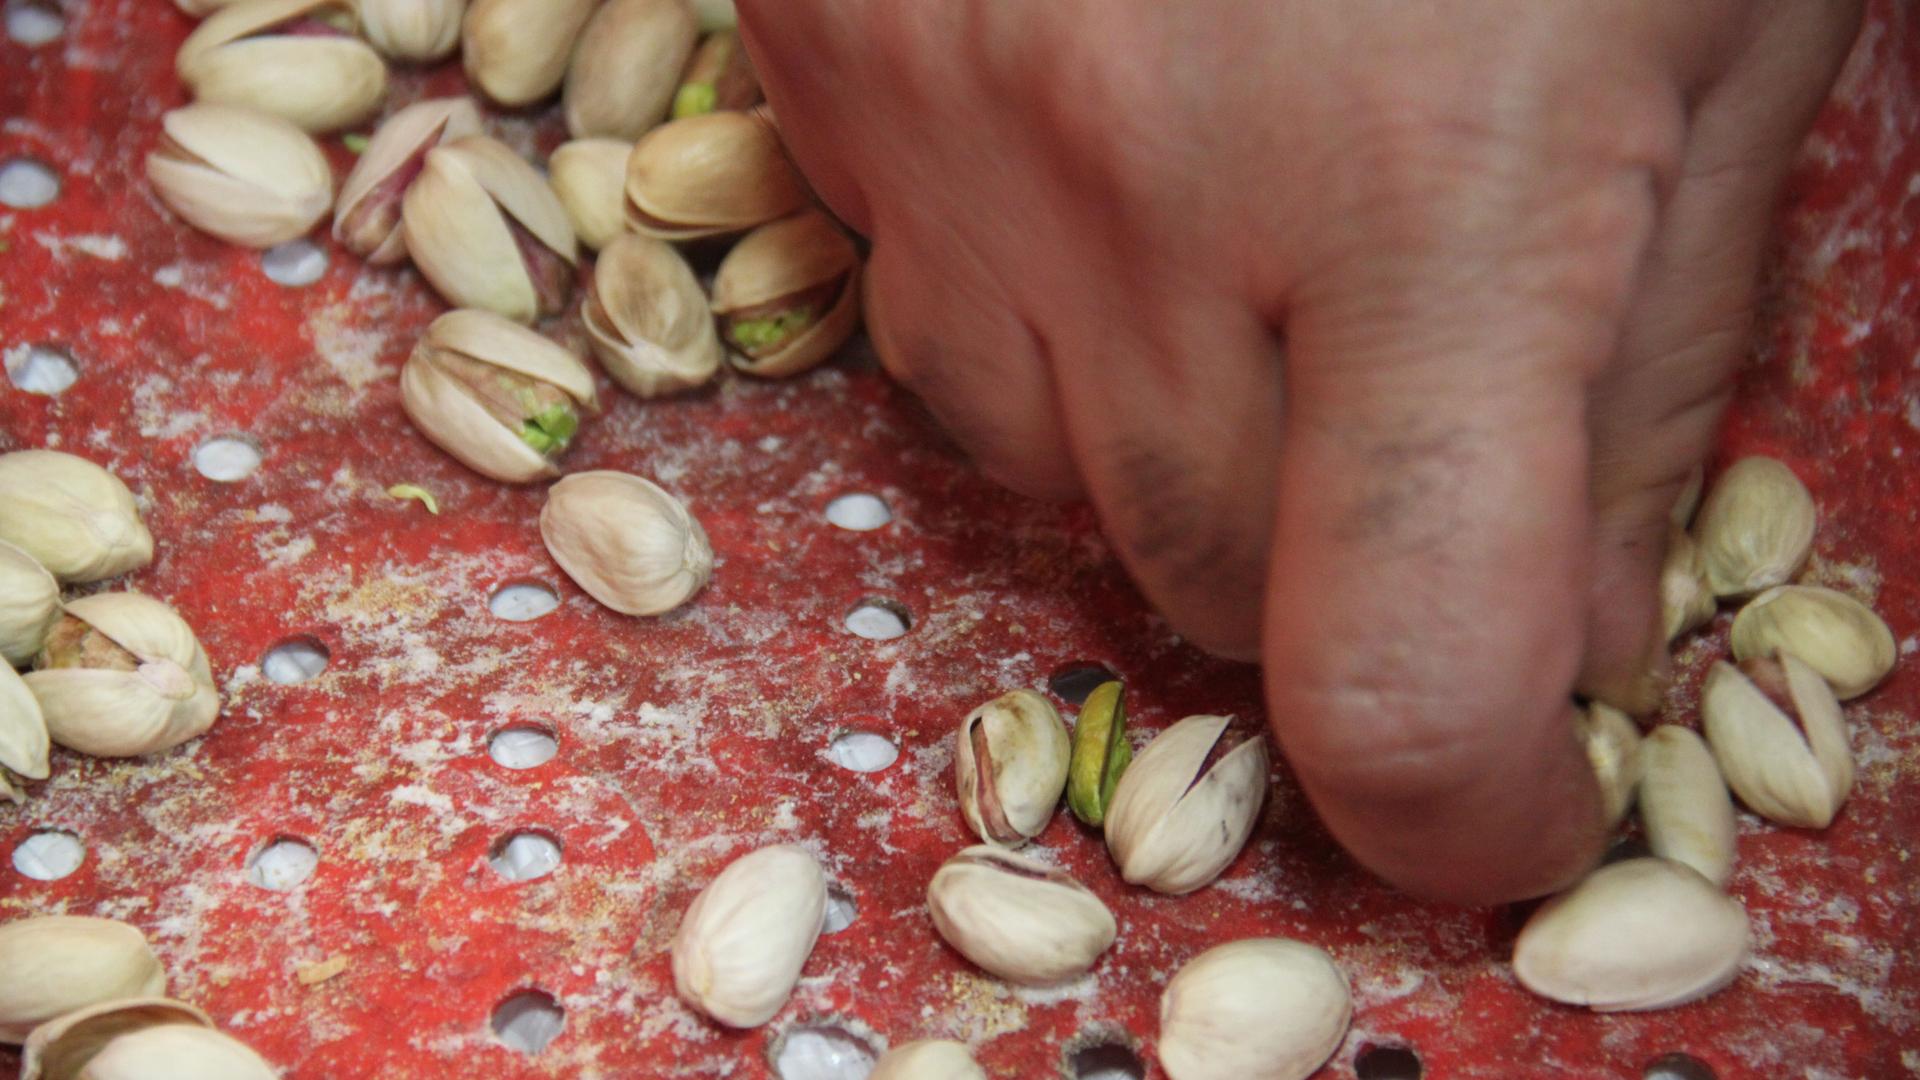 Mohammed Shehada sorts a bag of pistachios, weeding out the American-grown nuts from what are supposed to be Iranian-grown ones. American pistachios are bigger and lighter in color, and the shells are slightly pointier.